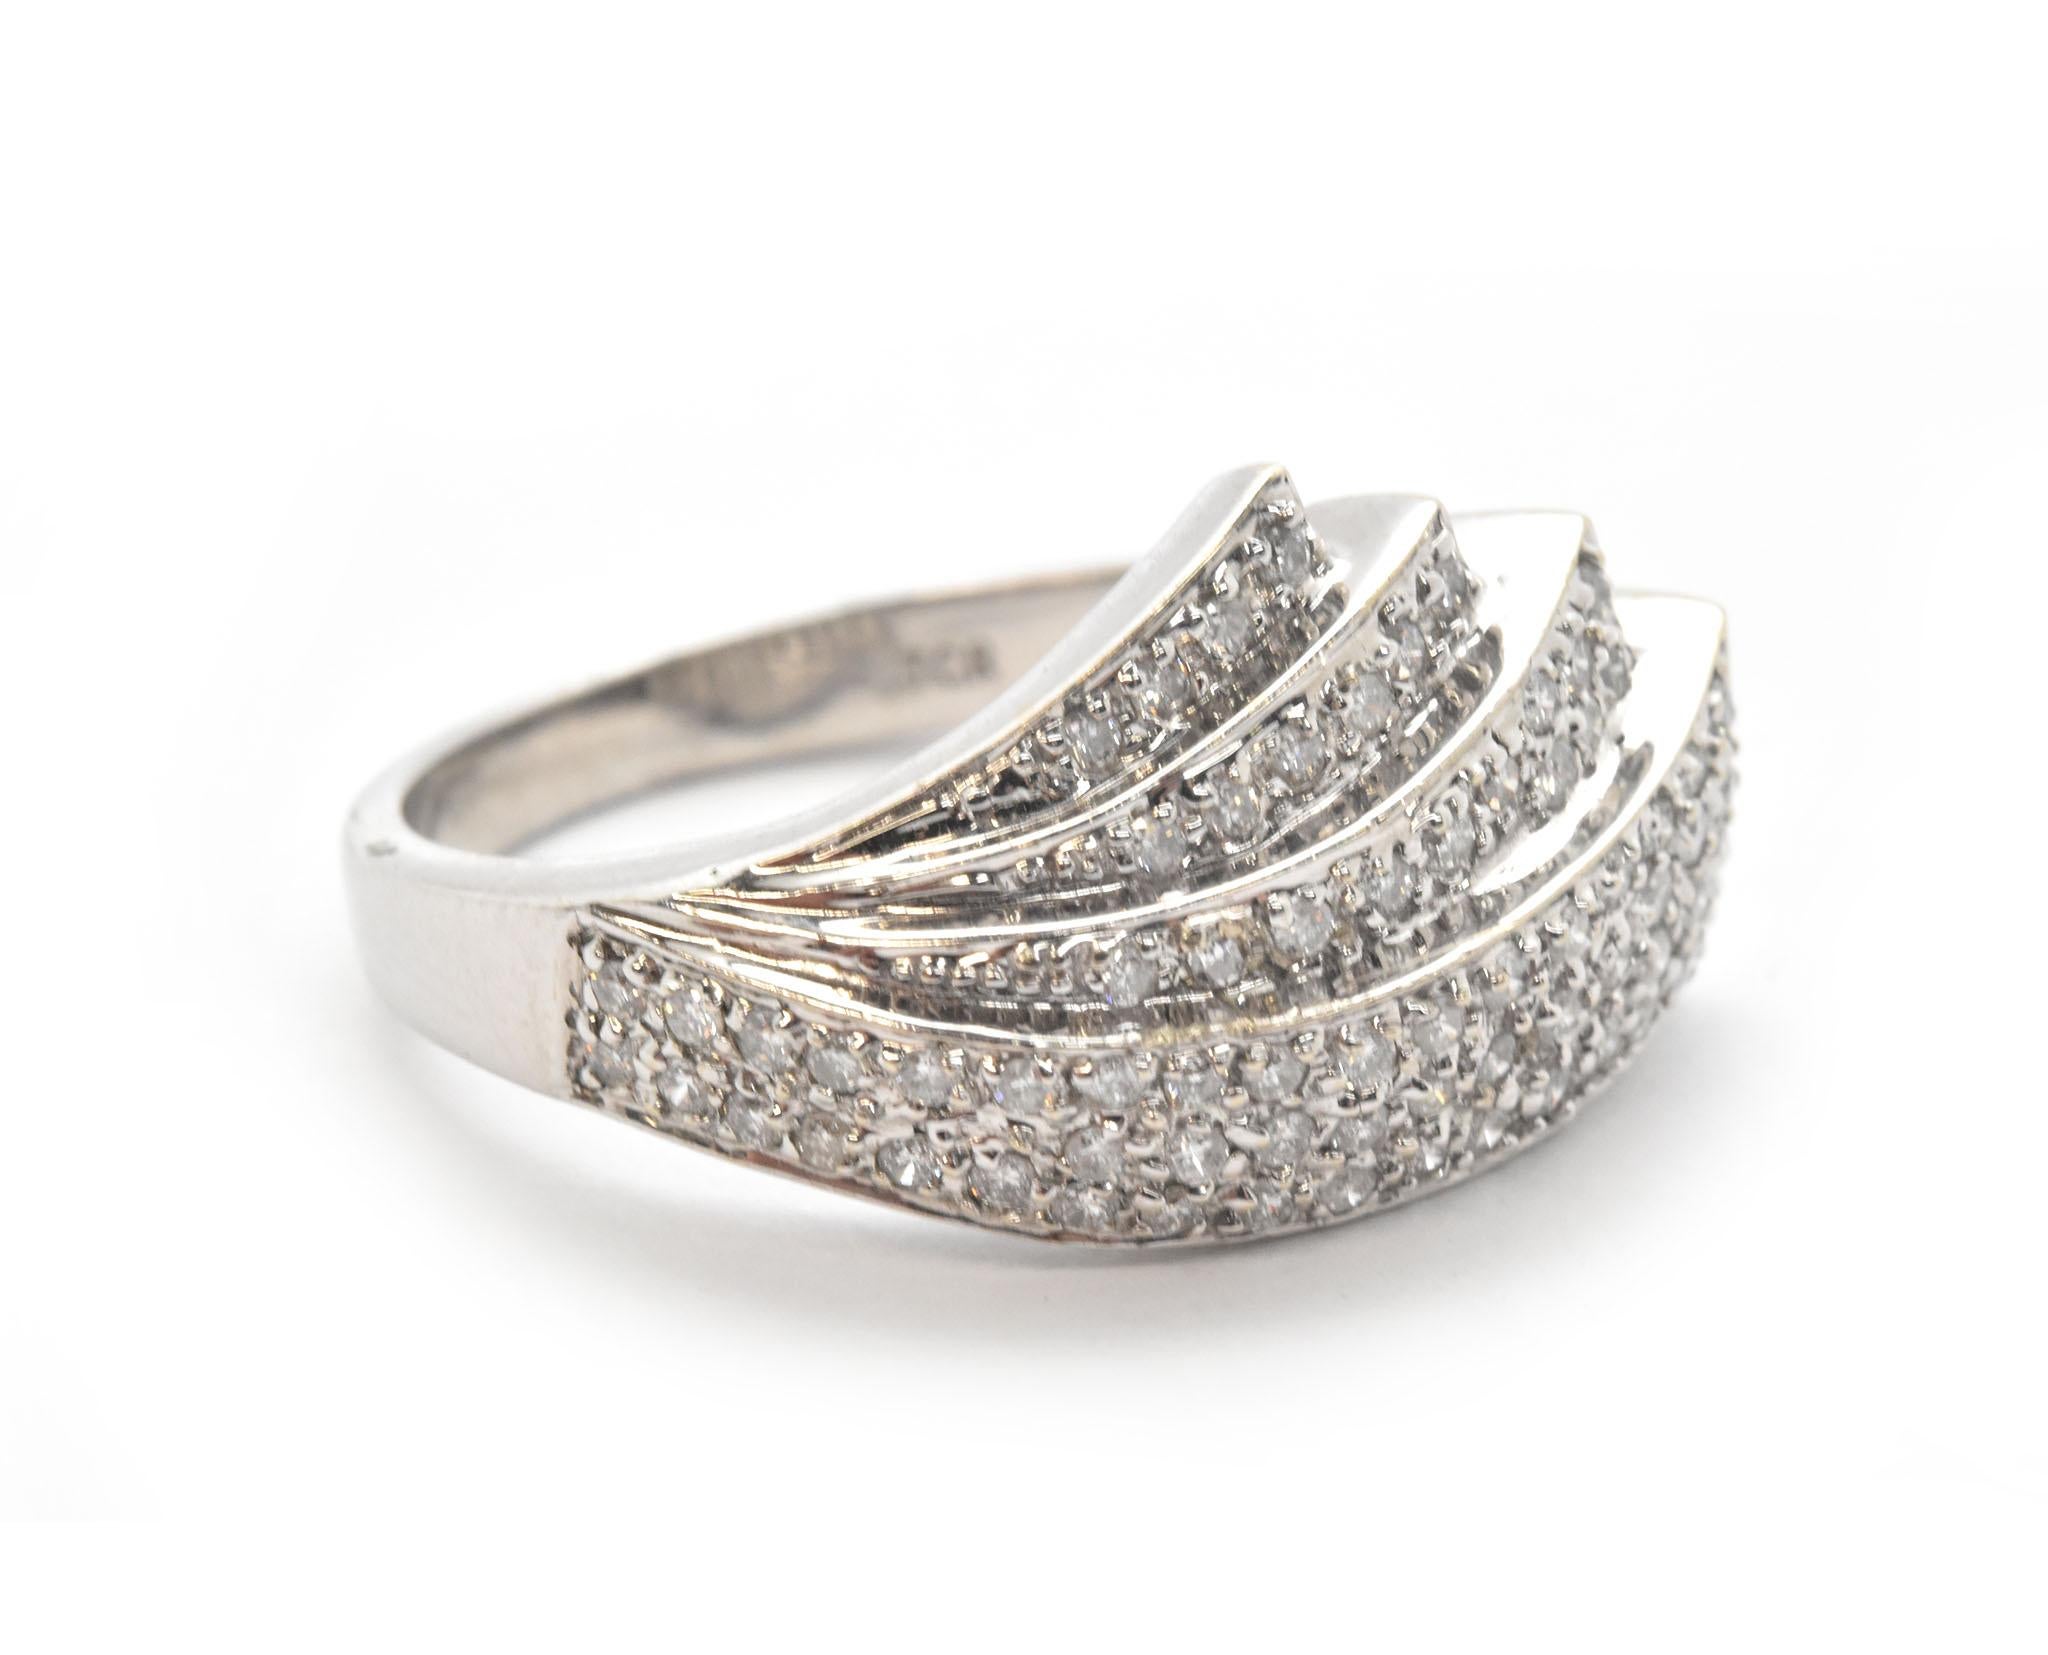 This fanning diamond band ring is made in 14k white gold and set with a total of 0.75 carats of white diamonds. Diamonds on this band ring are individually prong set to best display their true beauty, diamonds are graded I in color and SI1 in